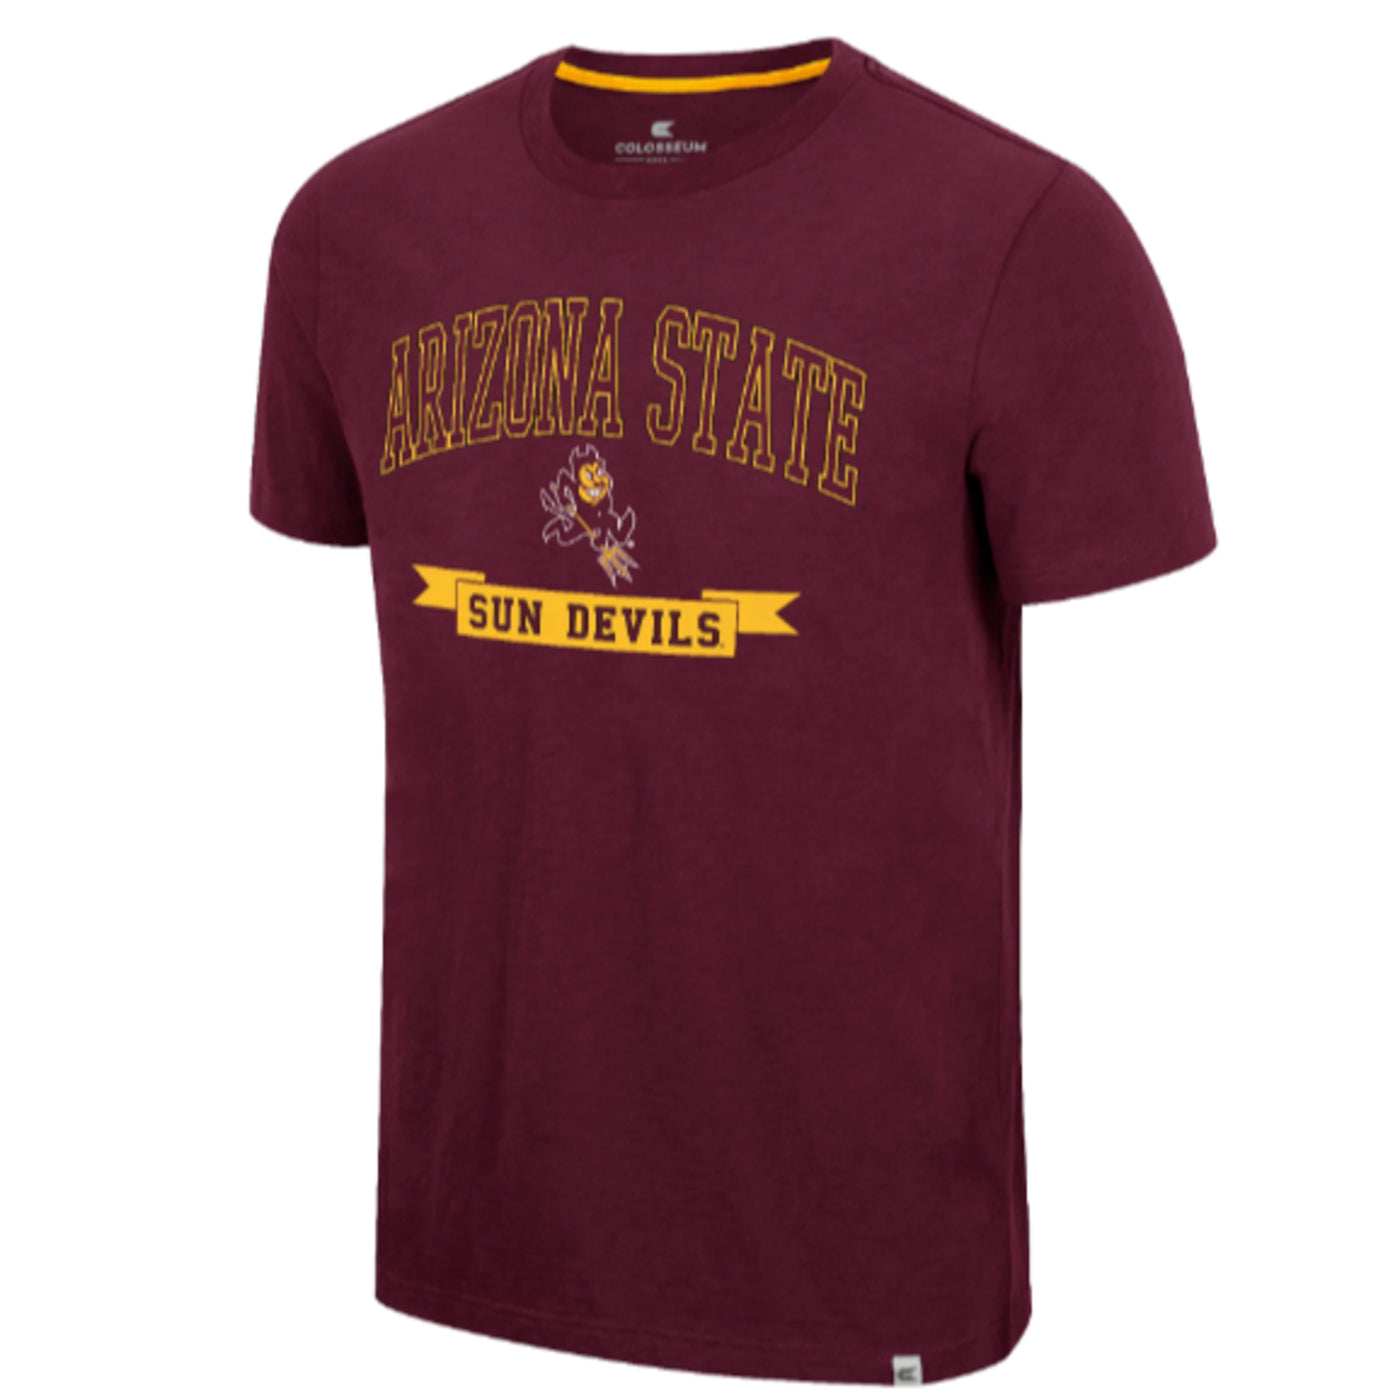 ASU Maroon t-shirt with the gold outline of the text 